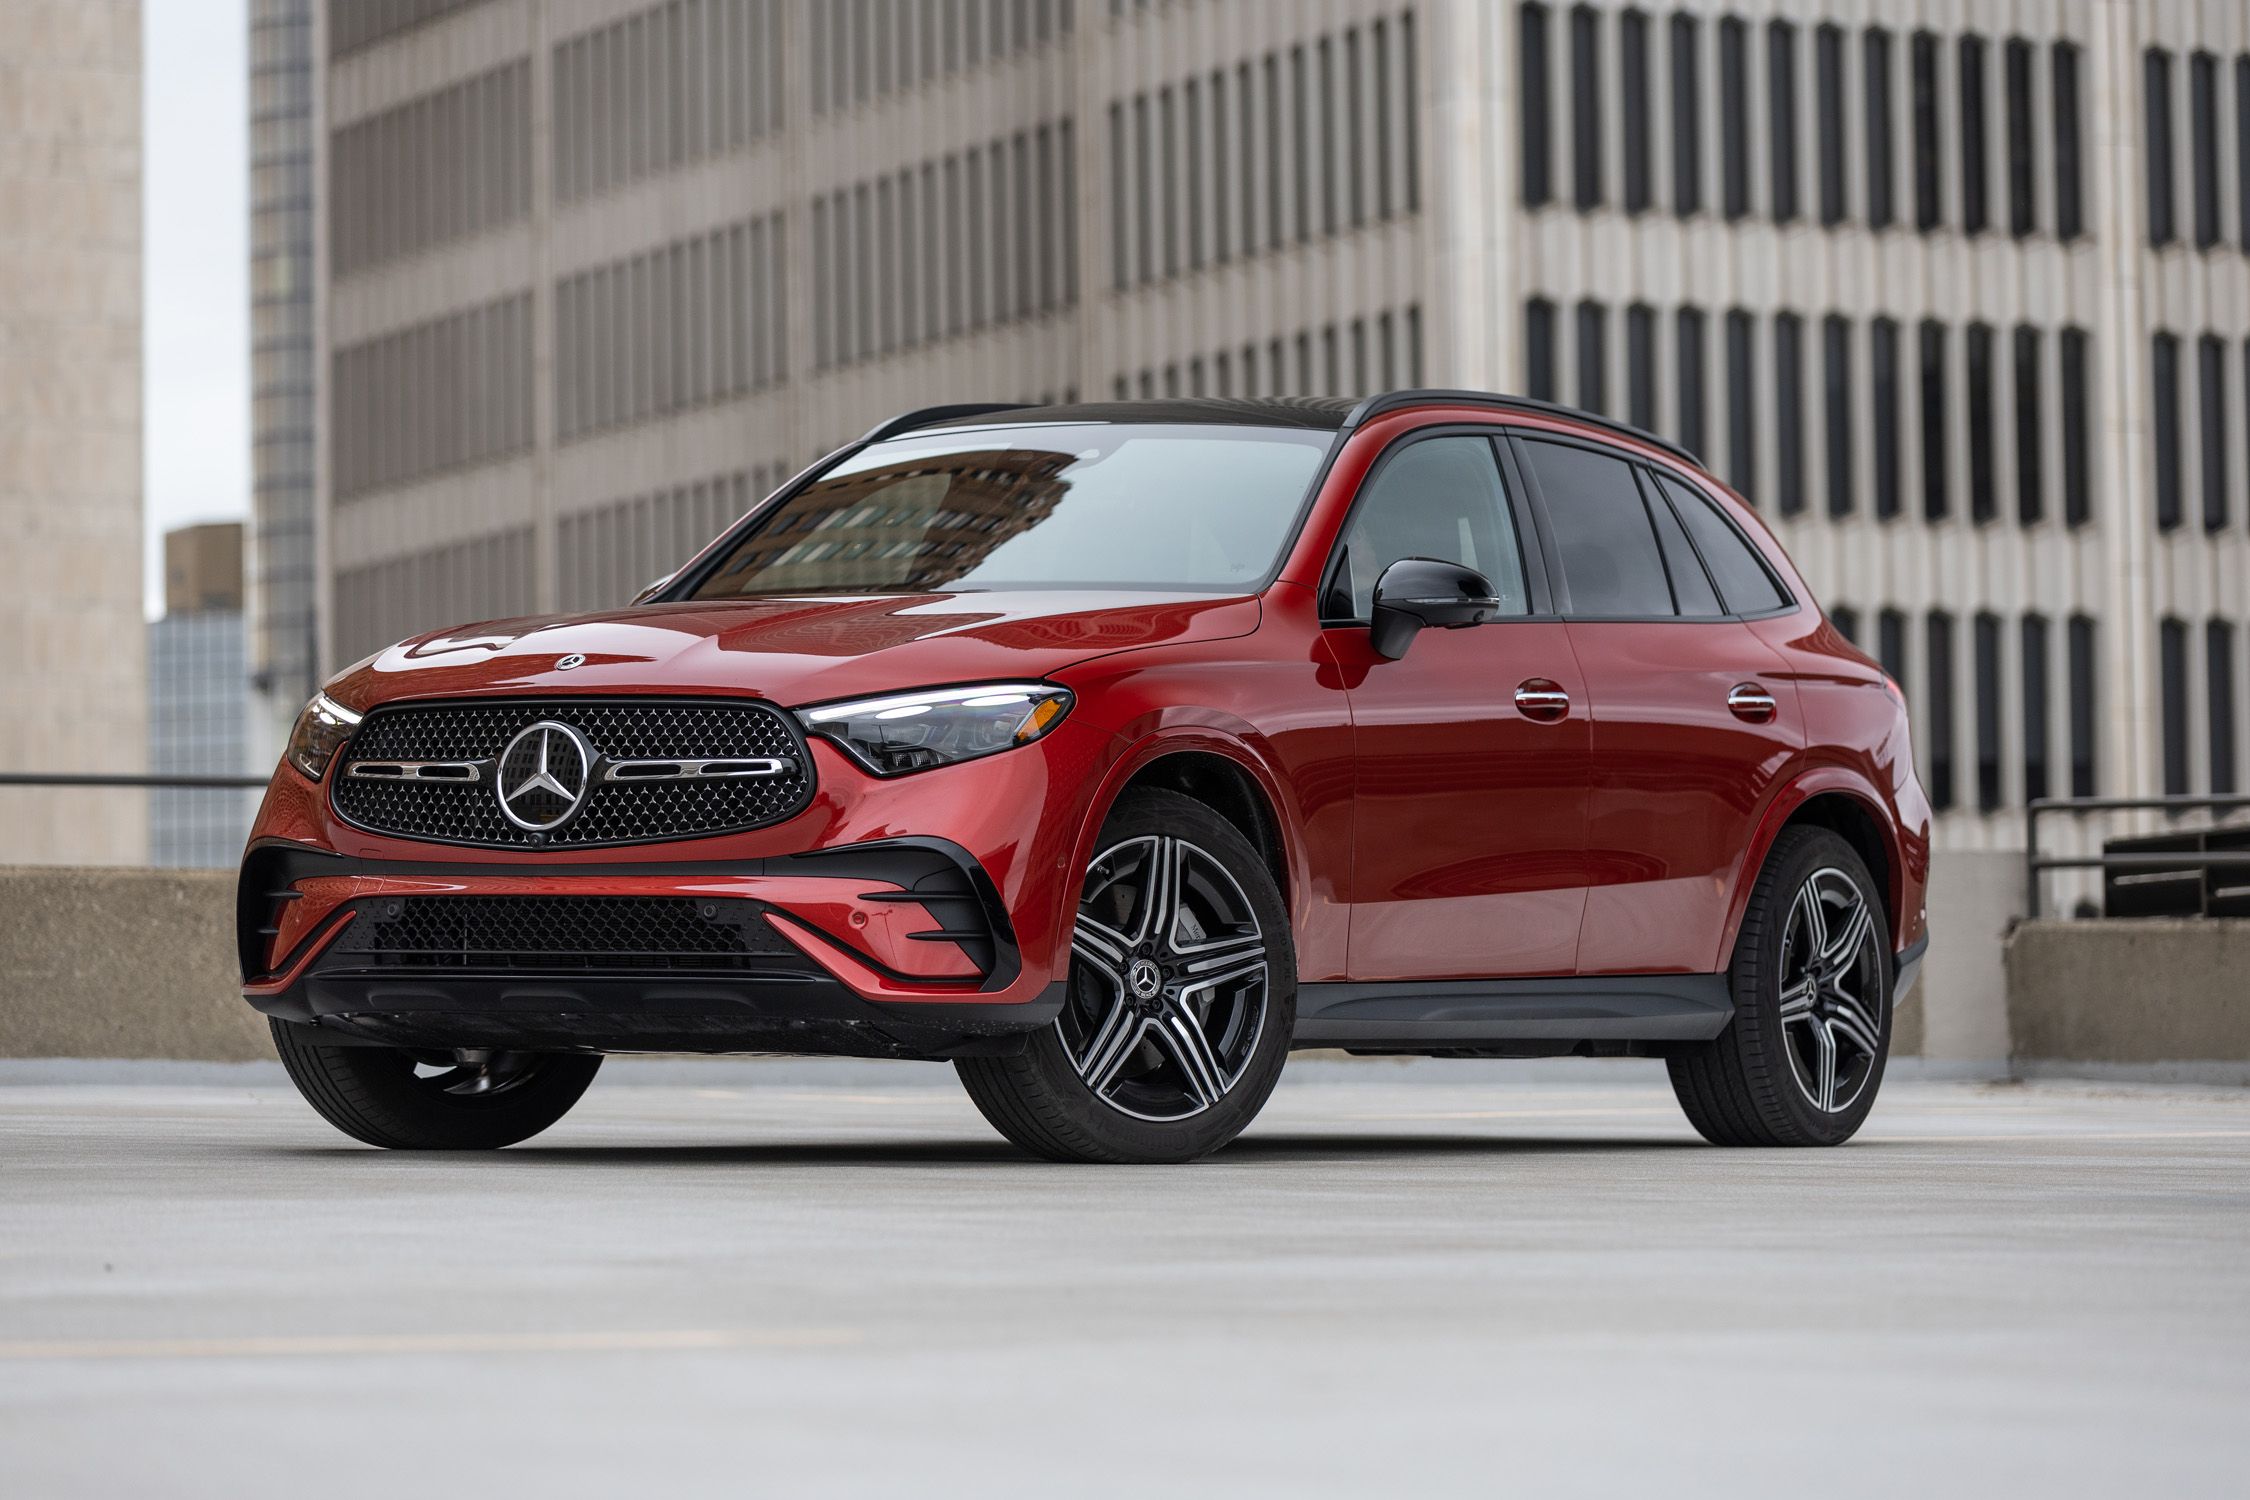 Is the new Mercedes-Benz GLC worth buying over the old one?